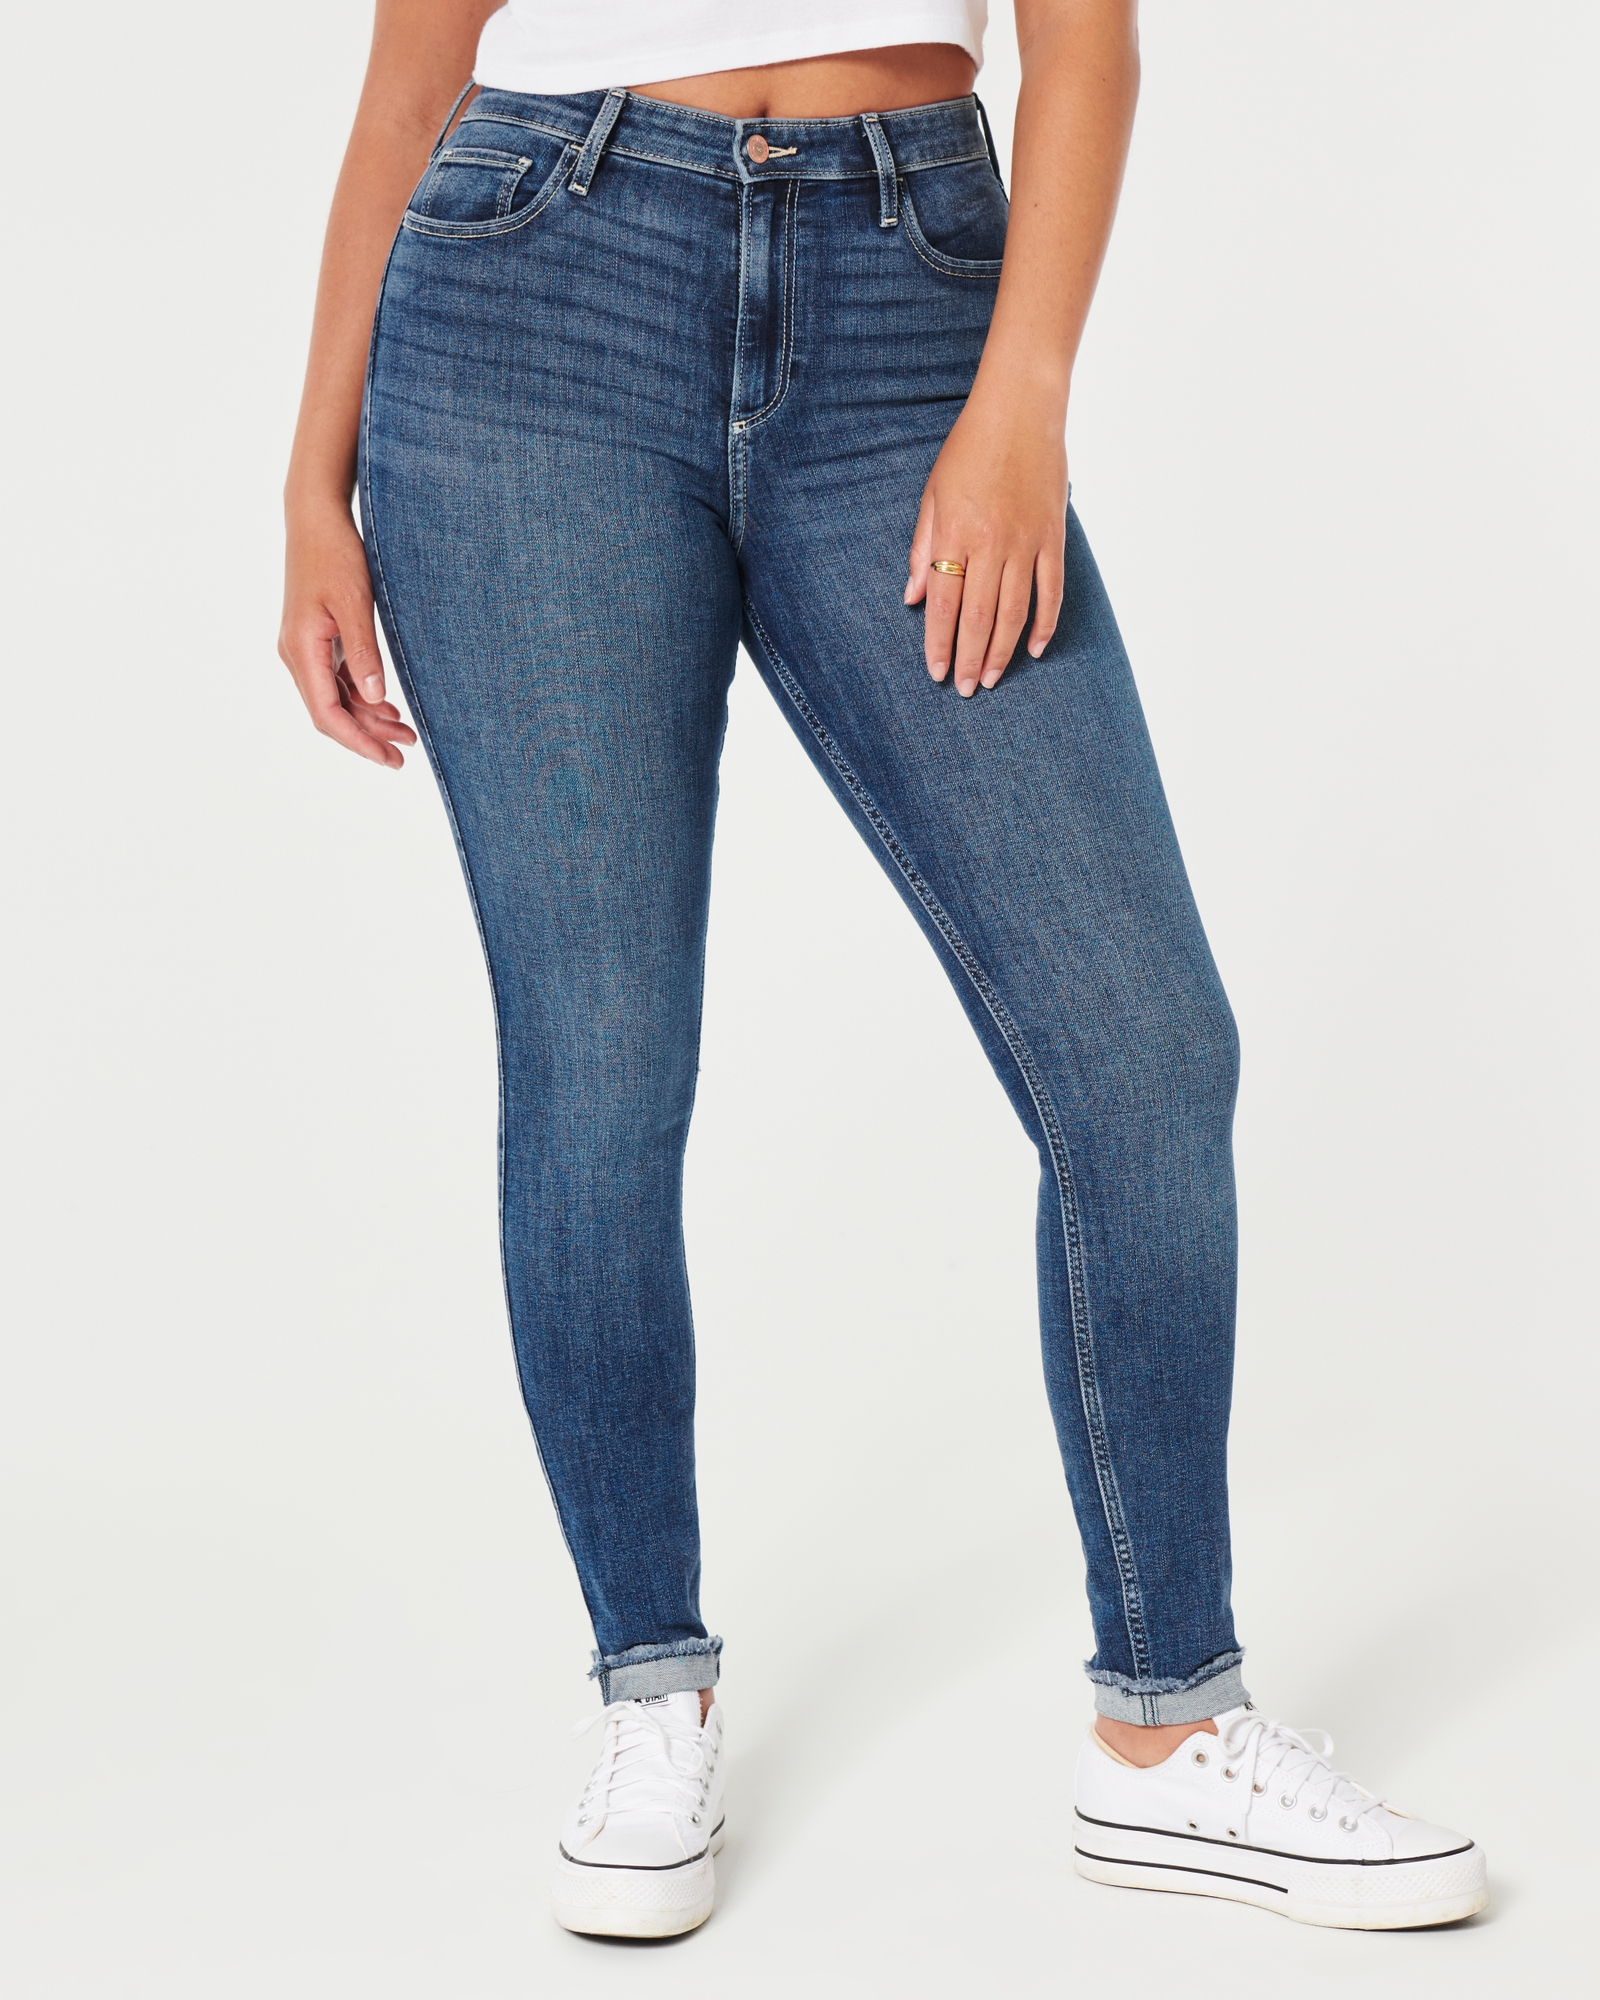 ARE THESE BETTER THAN GOOD AMERICAN? TRYING HOLLISTER CURVY FIT